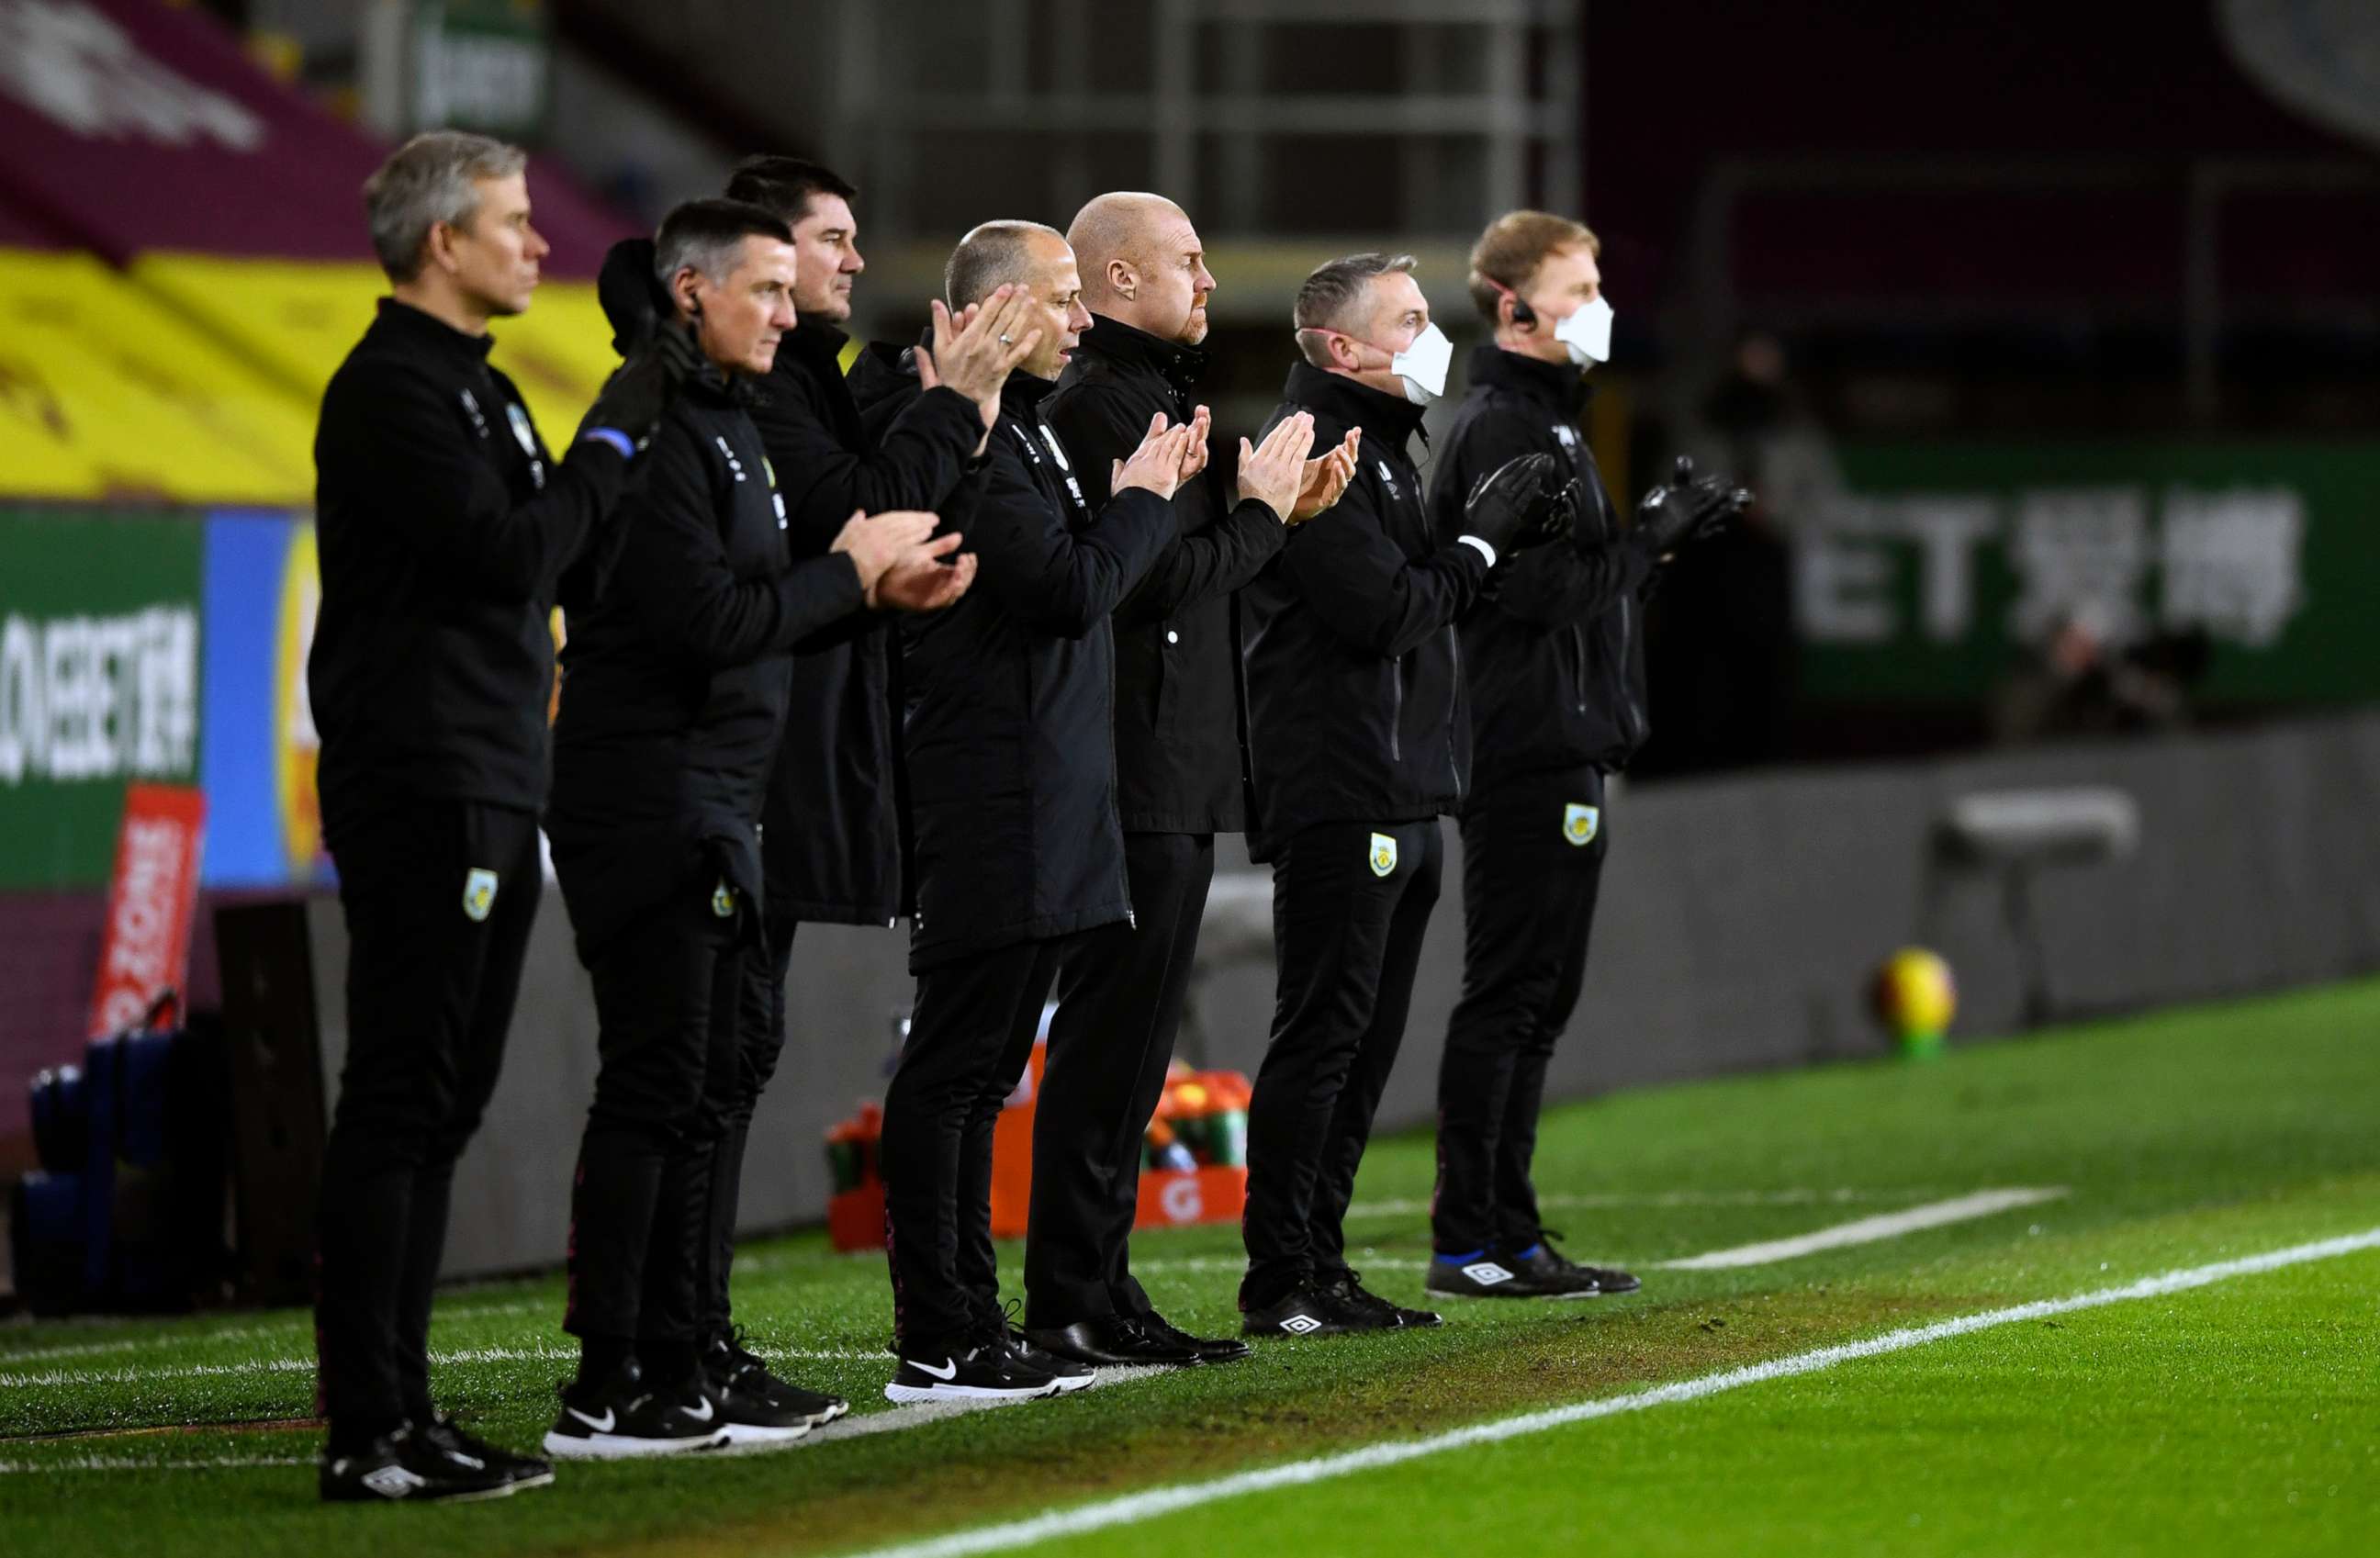 PHOTO: Burnley staff applaud for Captain Sir Tom Moore before the English Premier League soccer match between Burnley and Manchester City at Turf Moor stadium in Burnley, England, Feb. 3, 2021.